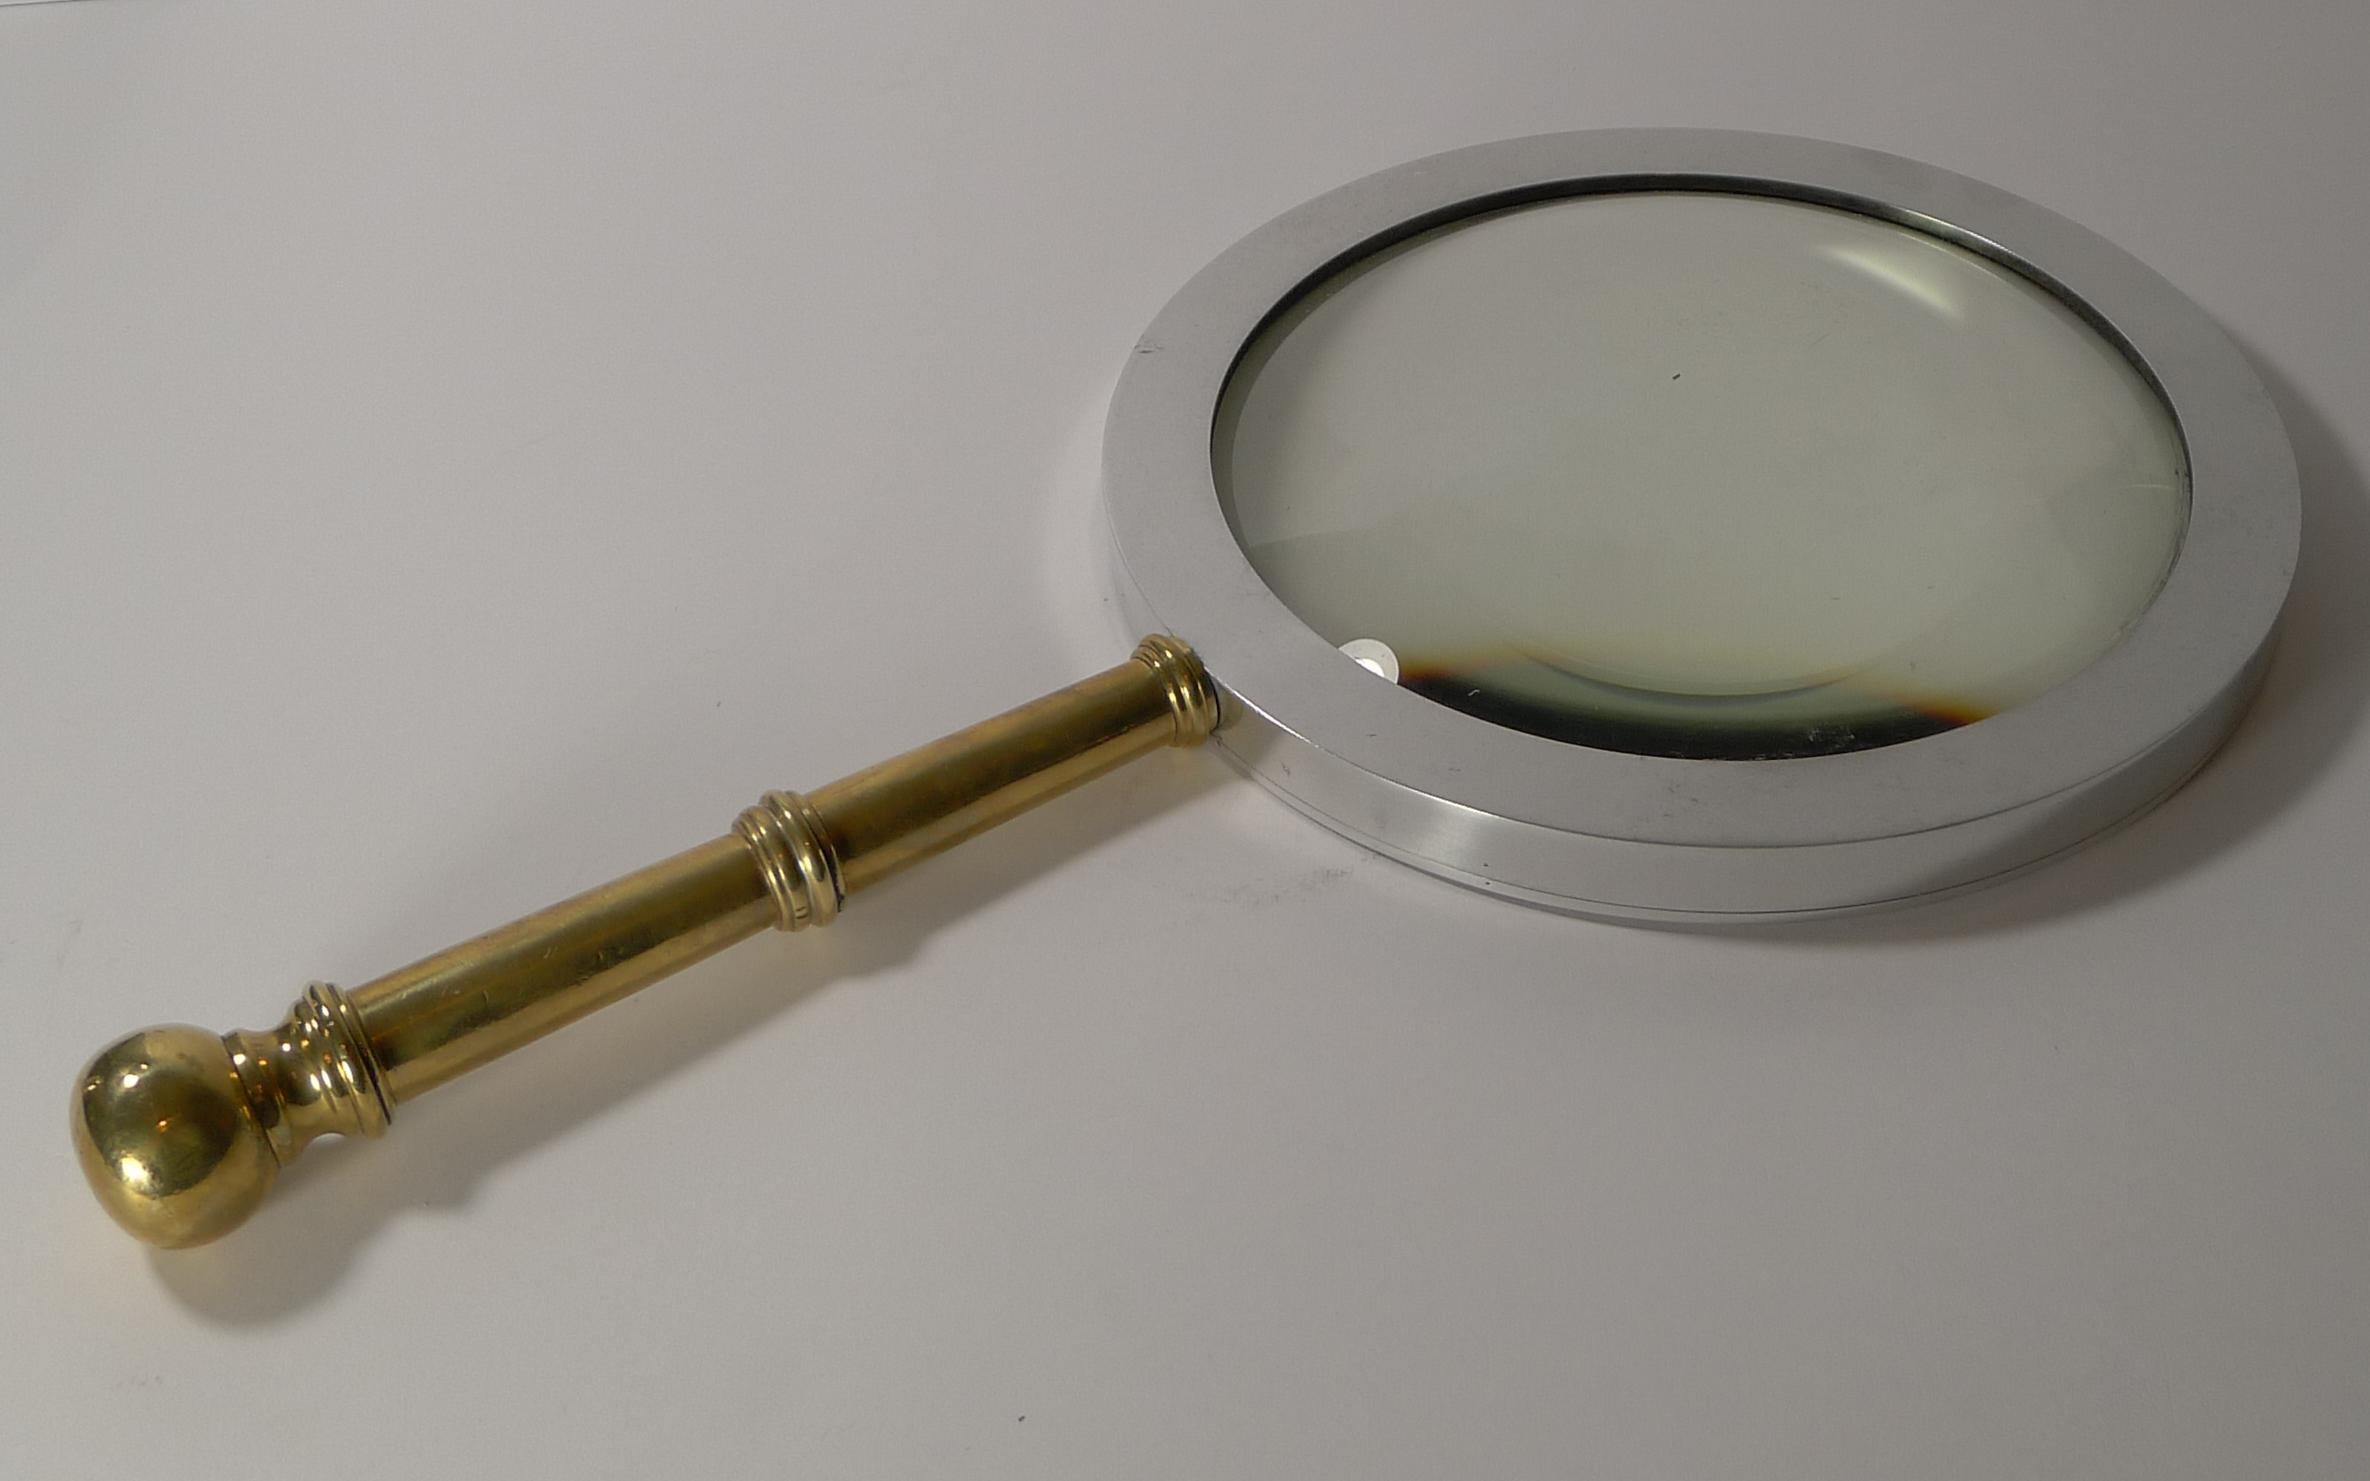 Rare Antique English Mammoth Map or Library Magnifying Glass, circa 1930 For Sale 2